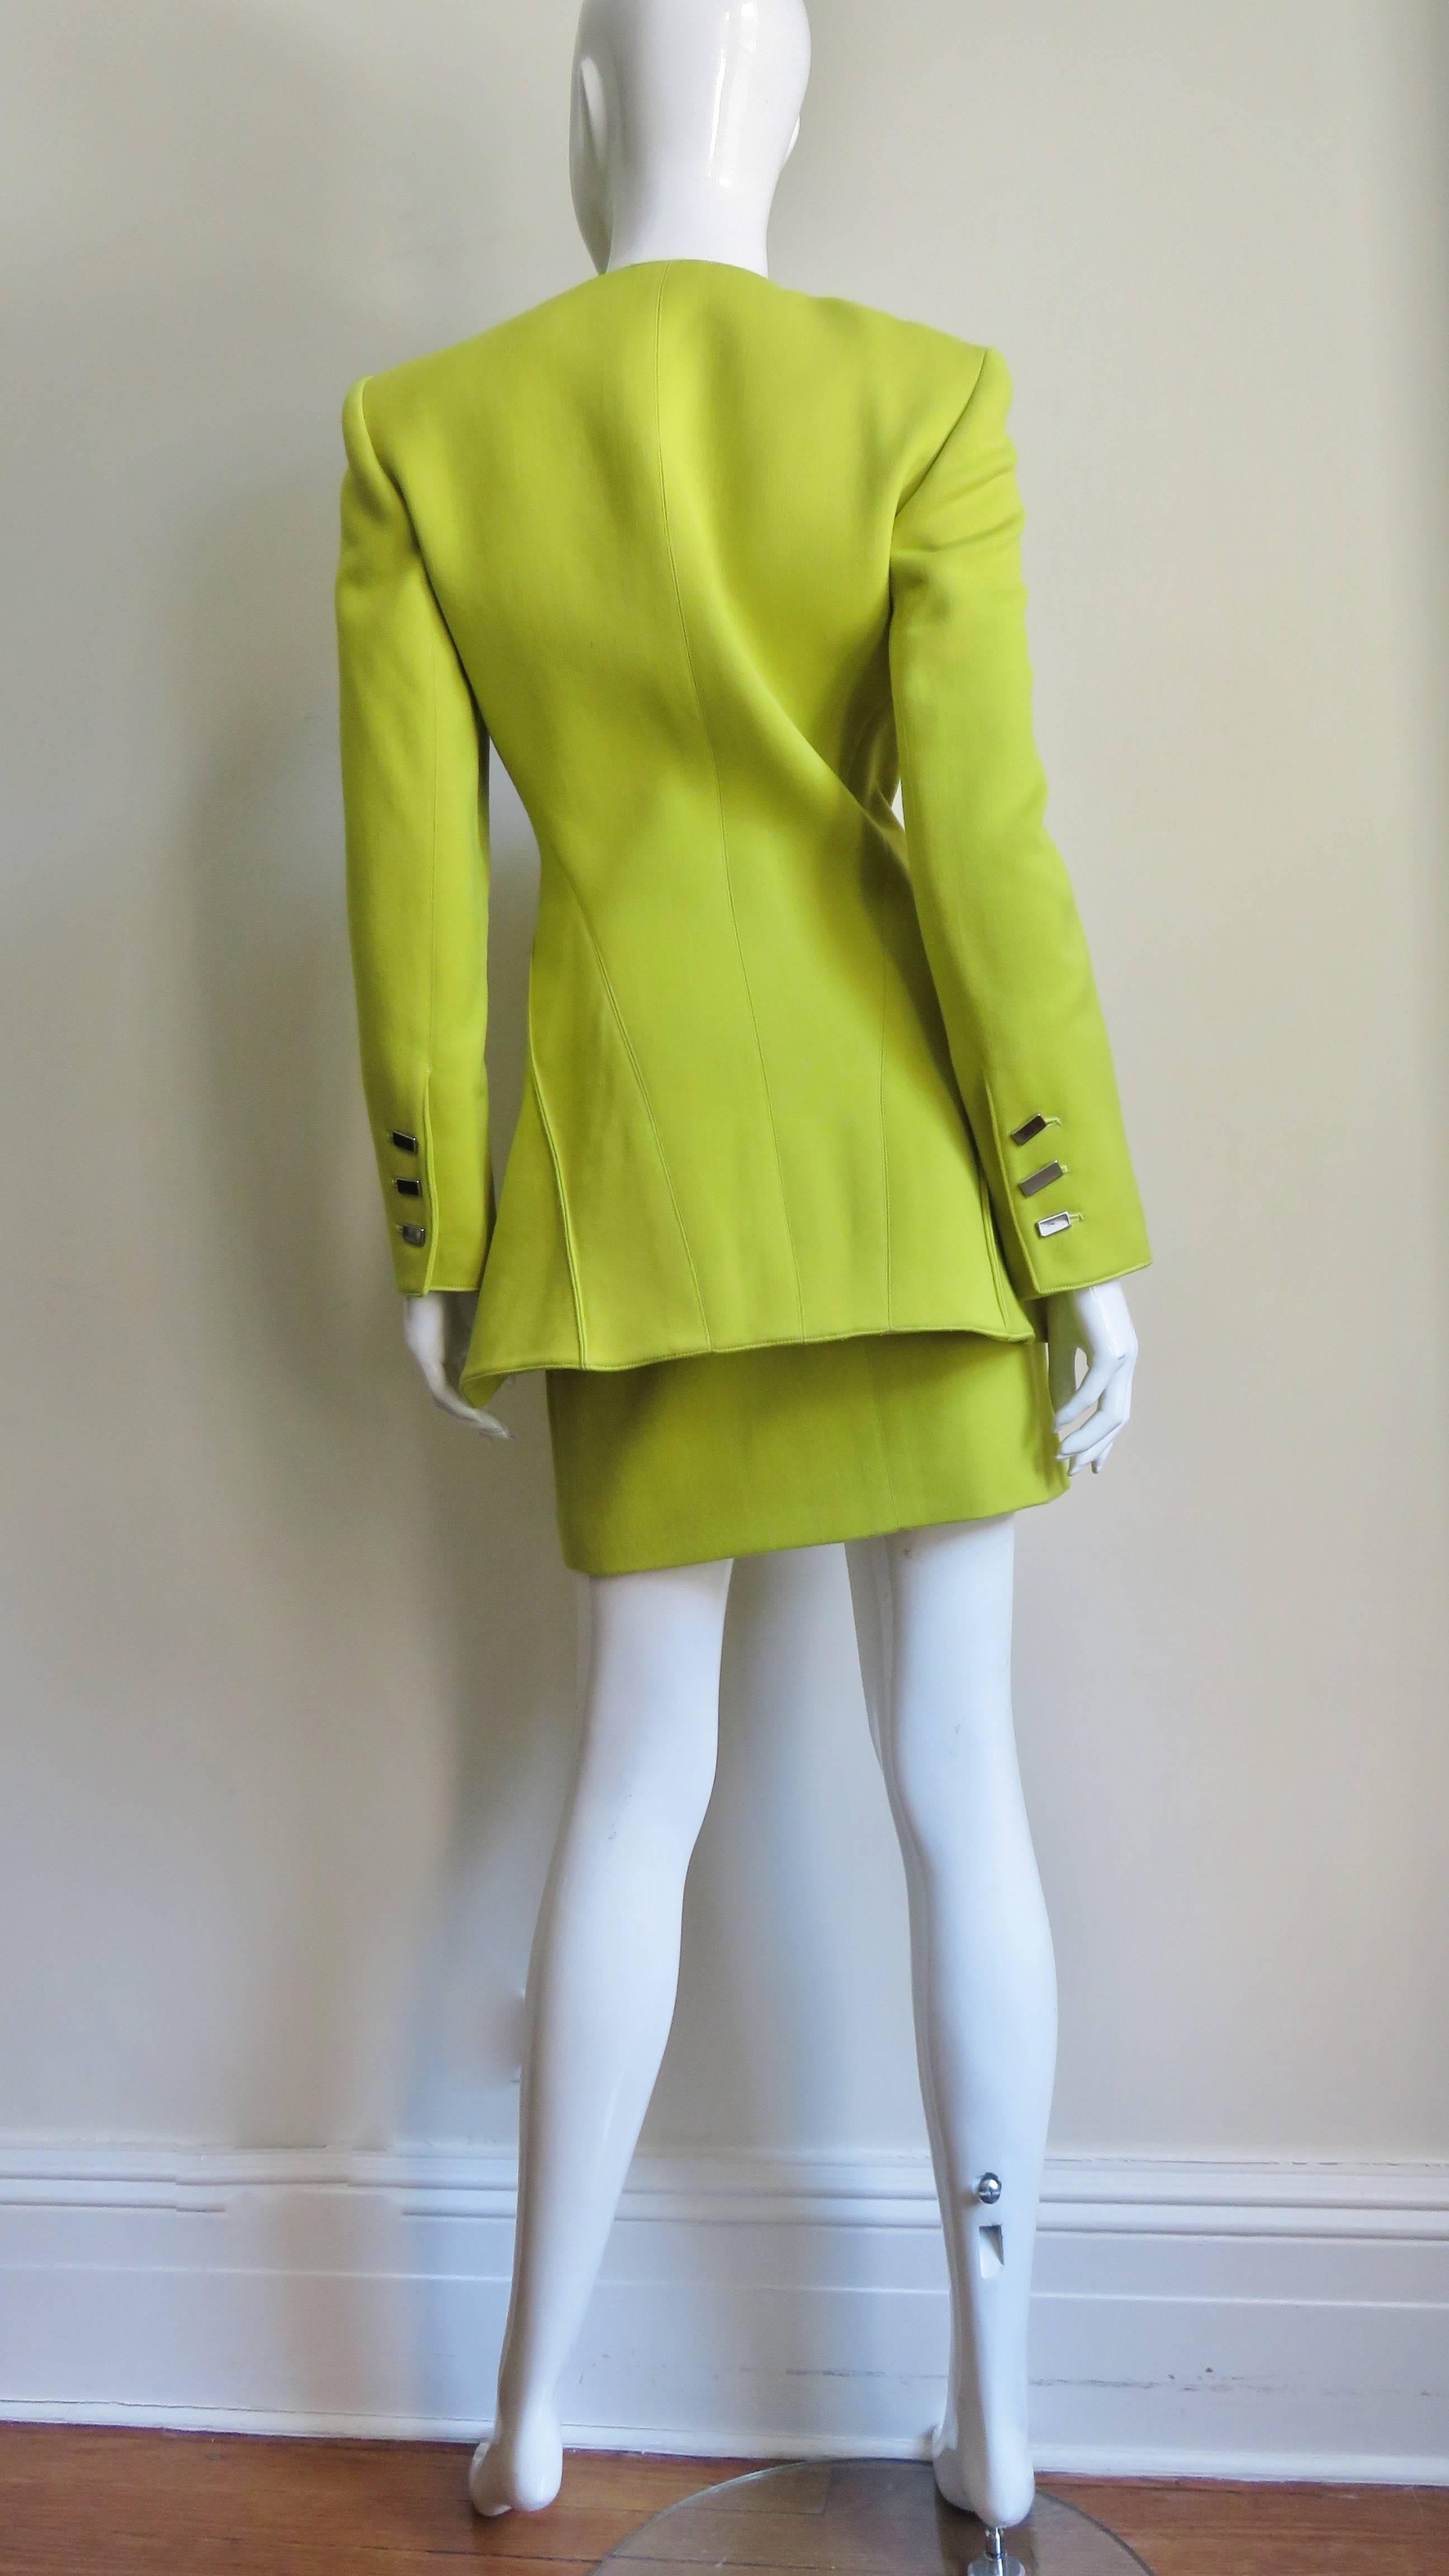  Claude Montana New Neon Futuristic Skirt Suit A/W 1991 For Sale 3